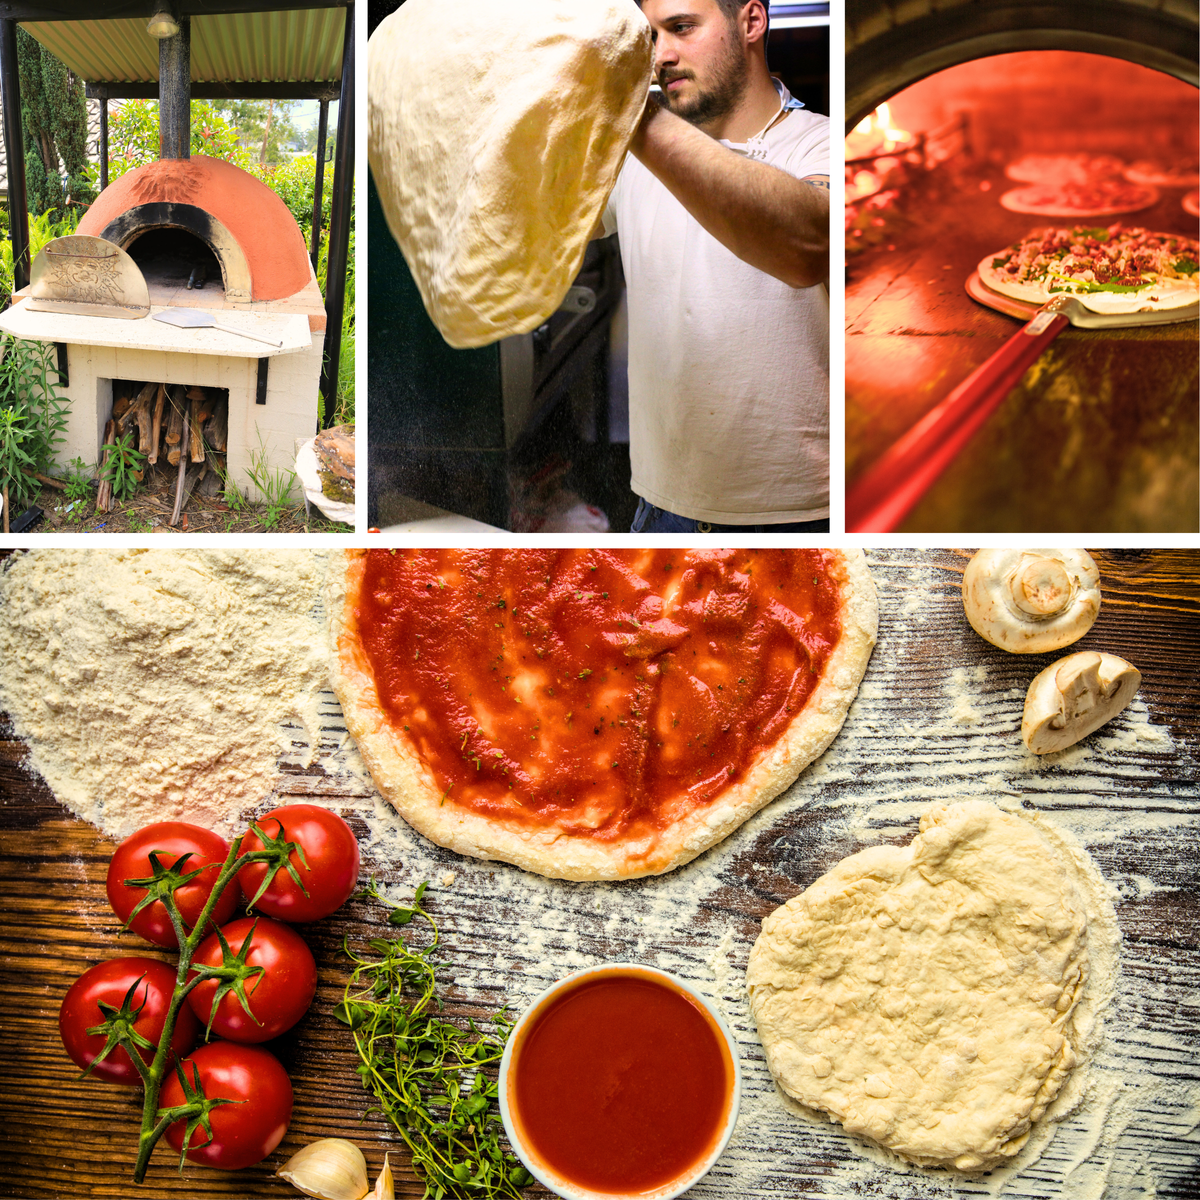 Outdoor Pizza Oven, Tossing Pizza dough, using pizza peel for oven, pizza making ingredients